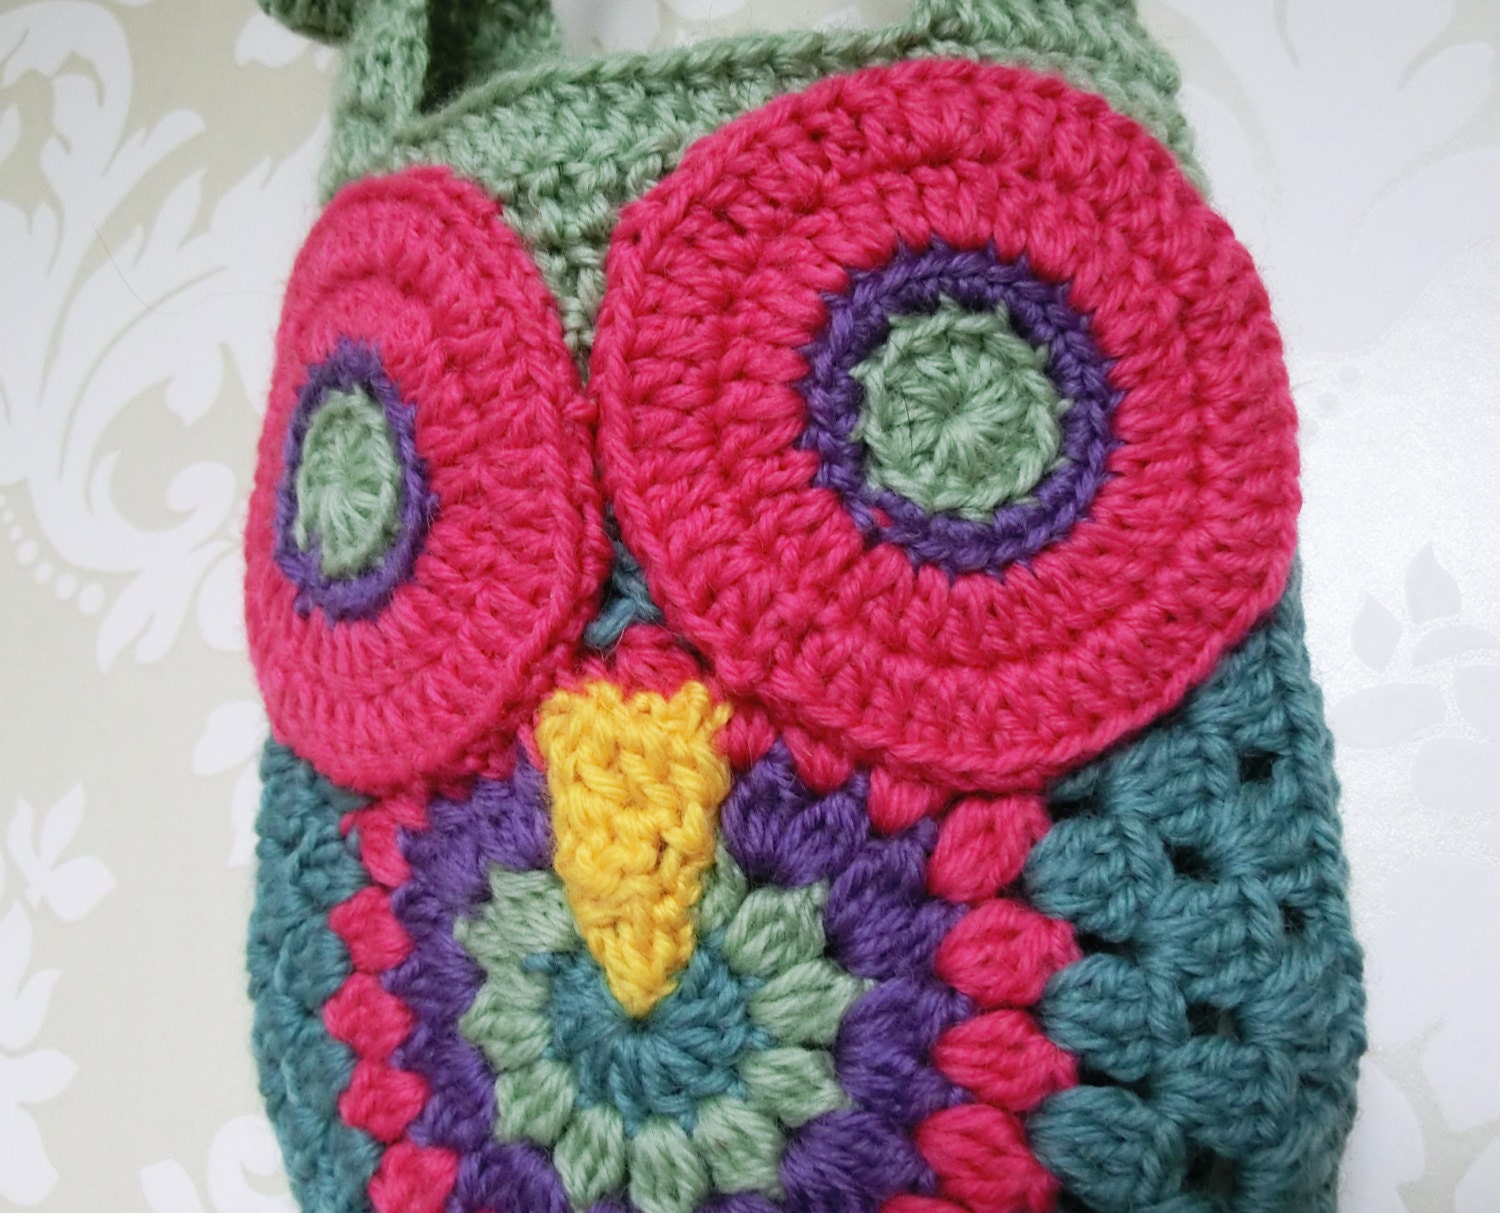 Twit Twoo! – Love, Lucie